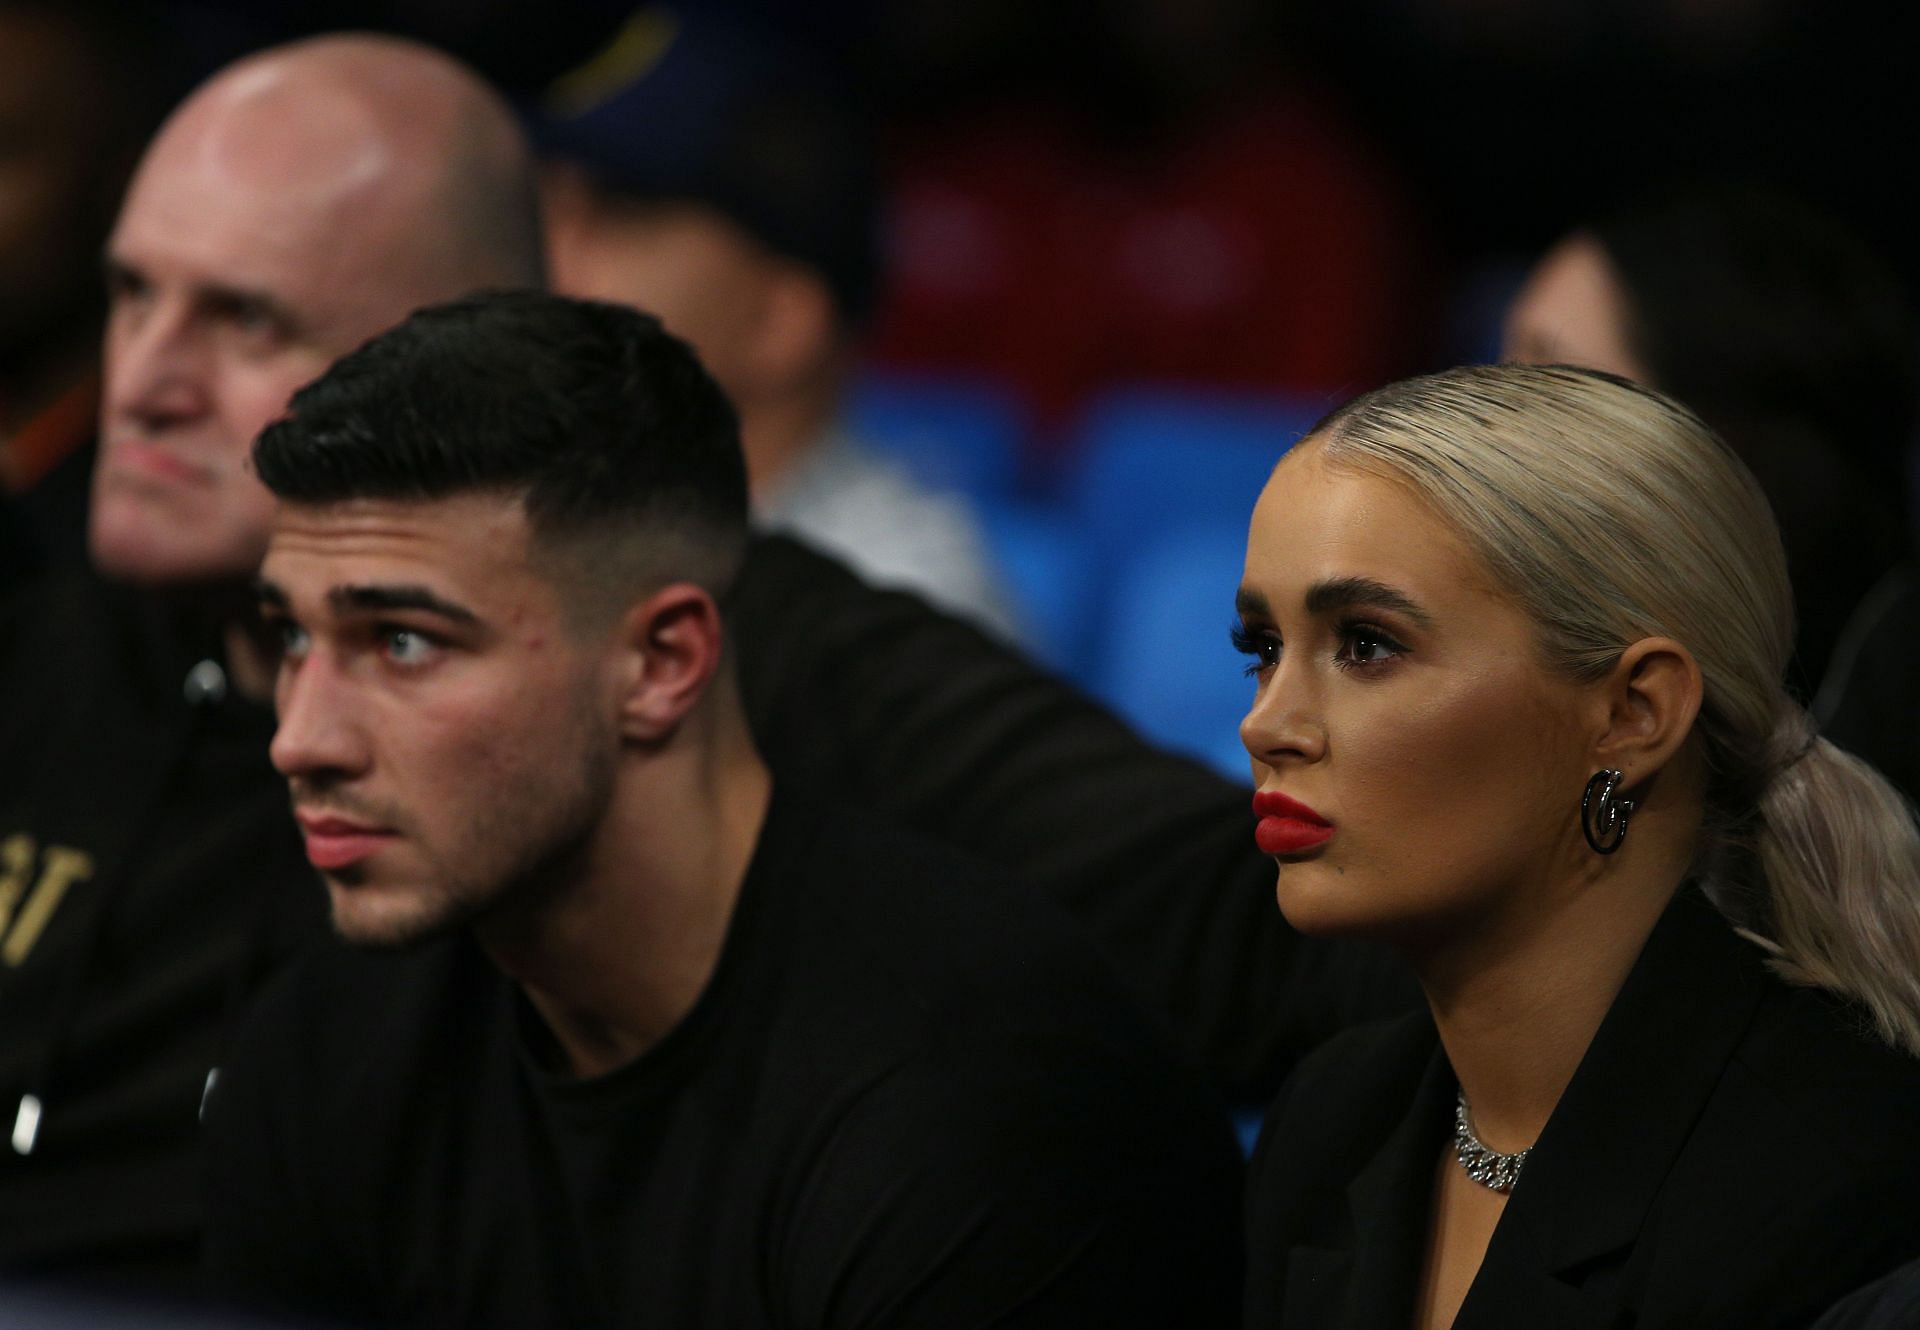 Tommy Fury (left) and Molly-Mae Hague (right) - Getty Images